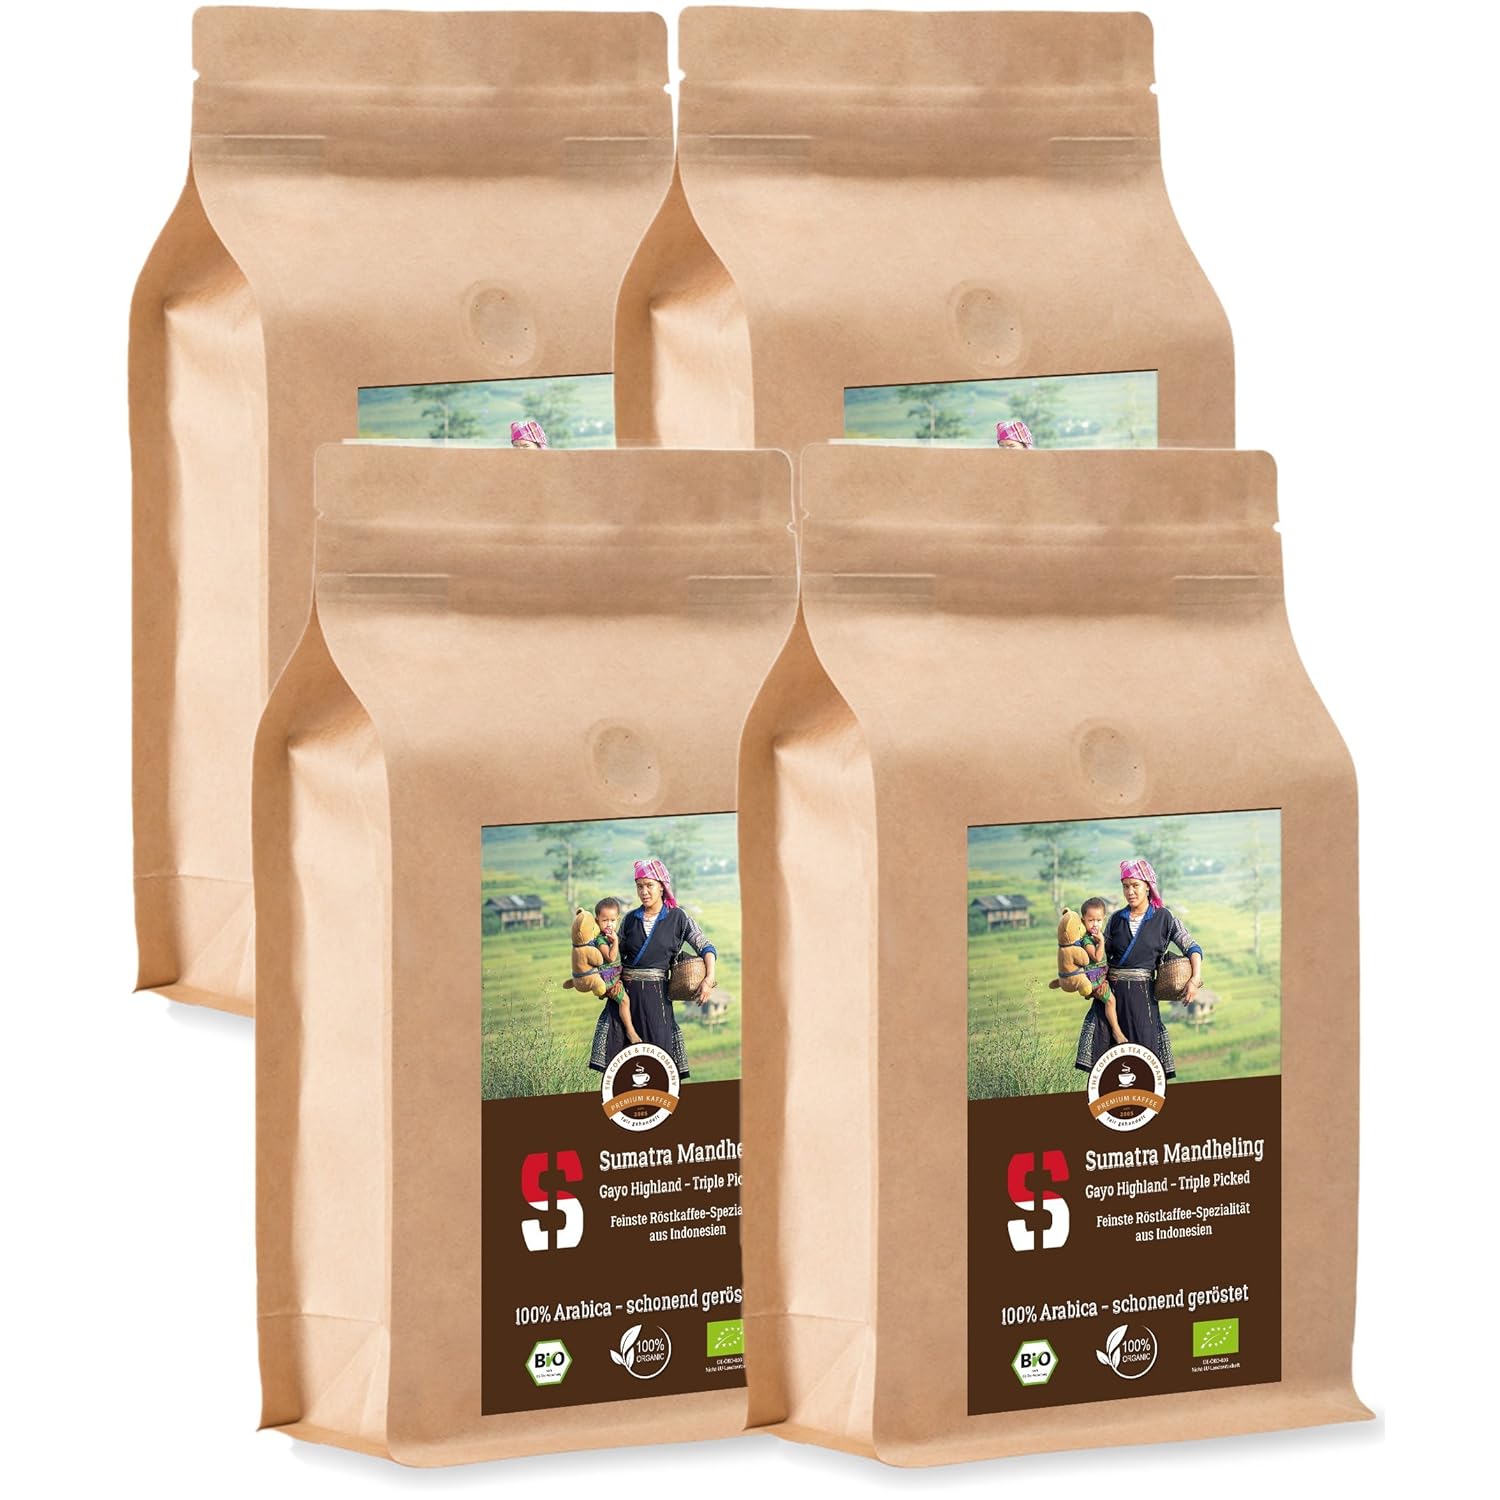 Coffee Globetrotter - Sumatra Mandheling Gayo Highland - Organic - 4 x 1000 g Very Fine Ground - for Fully Automatic Coffee Grinder - Roasted Coffee from Organic Cultivation | Gastropack Economy Pack